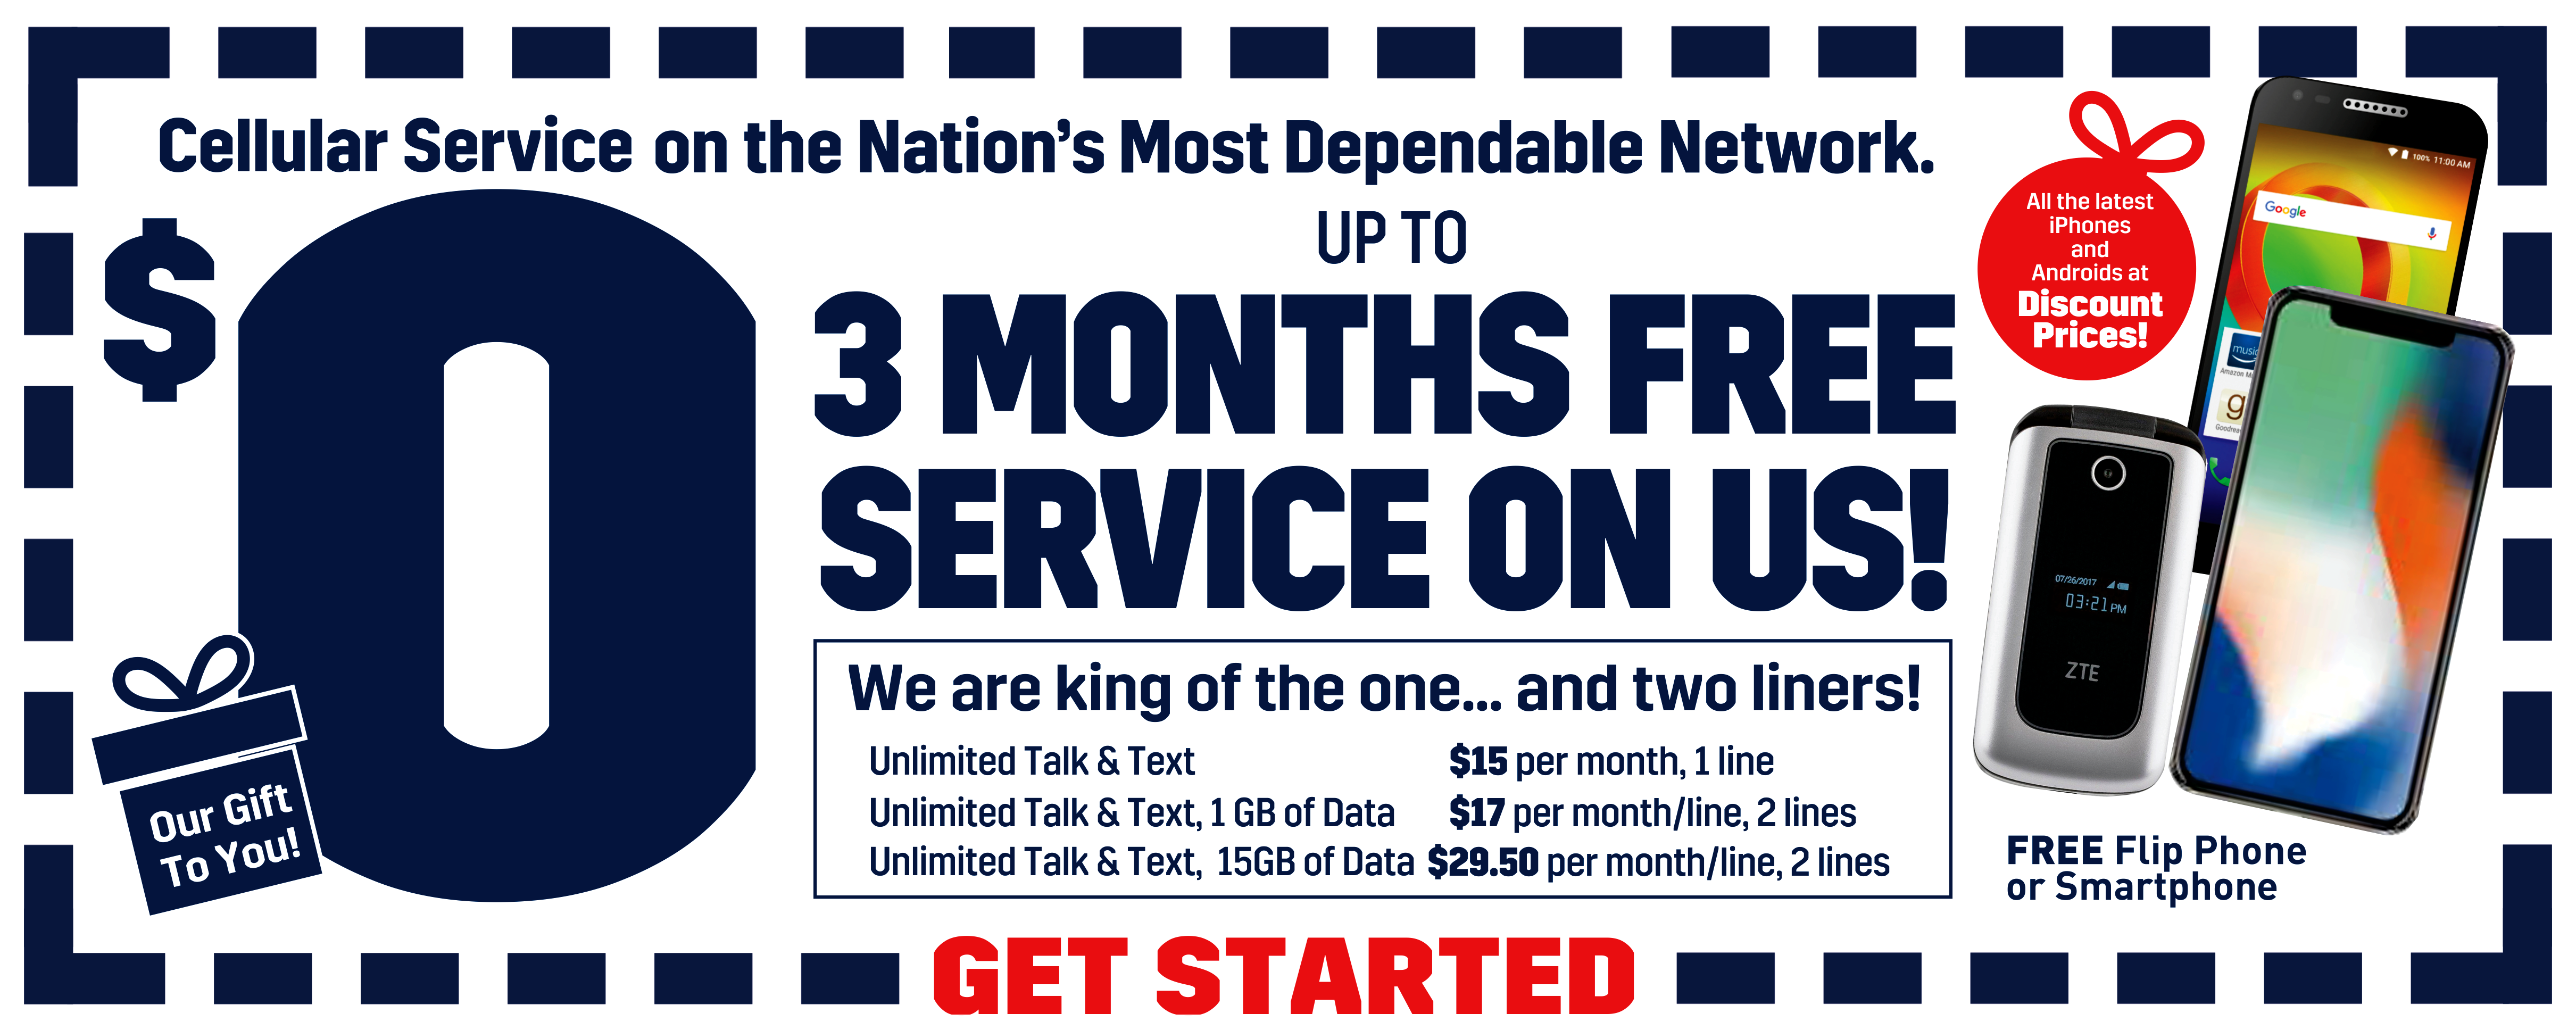 3 Months Free Service On Us!